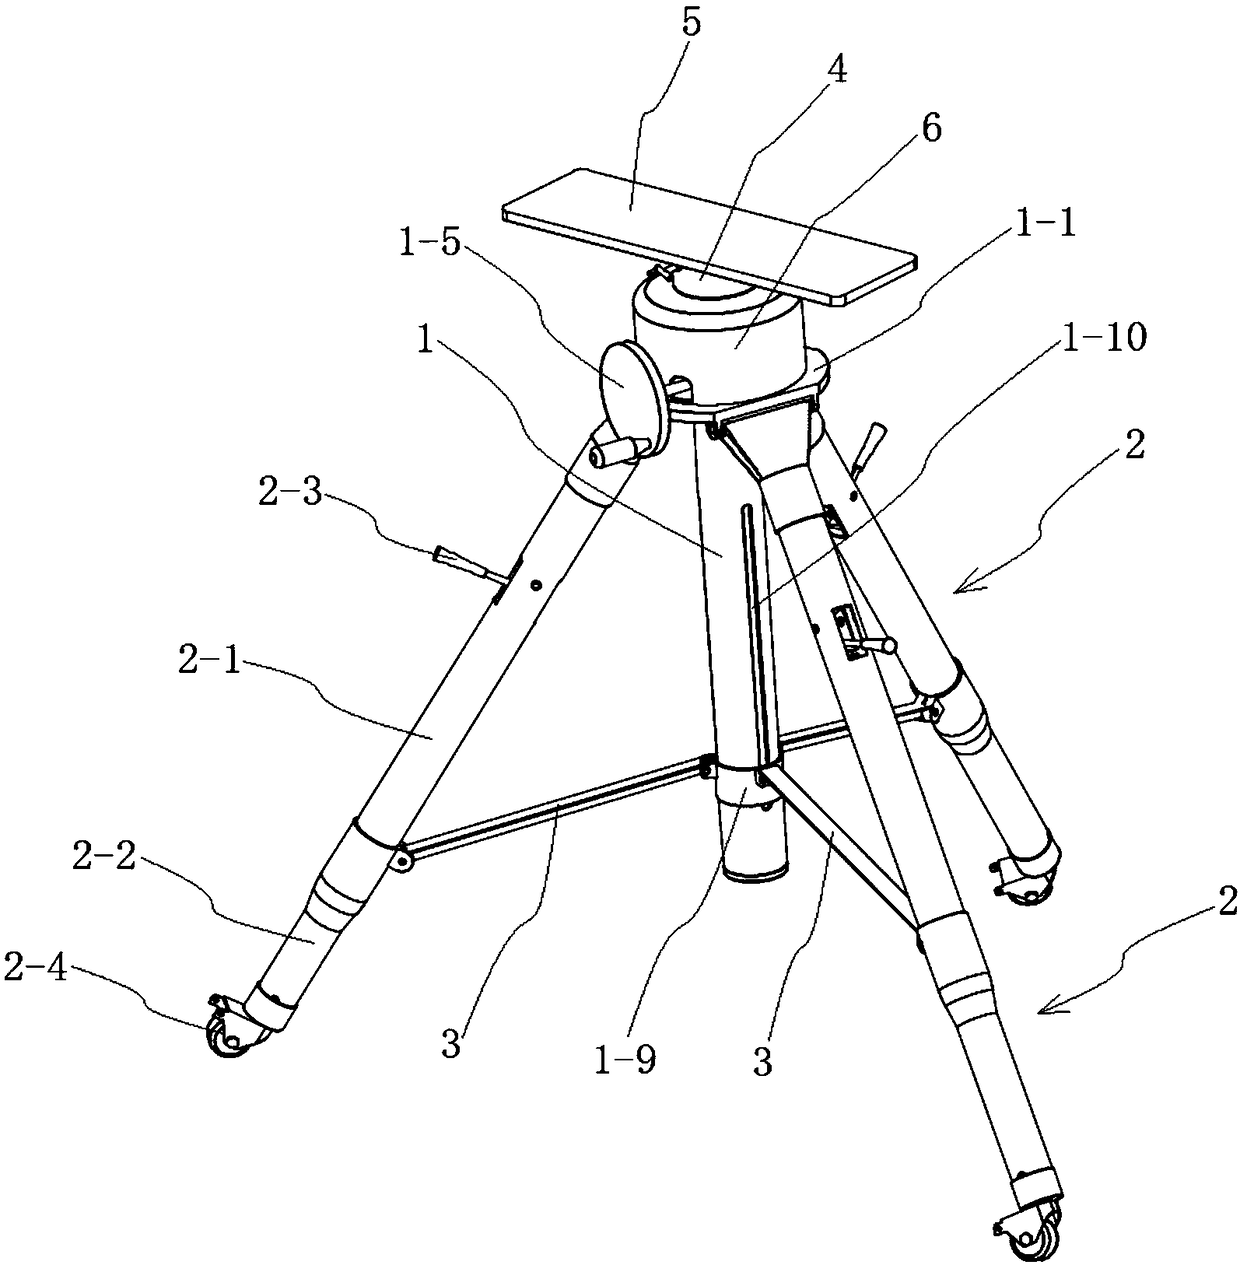 Tripod device convenient to operate and operation method thereof